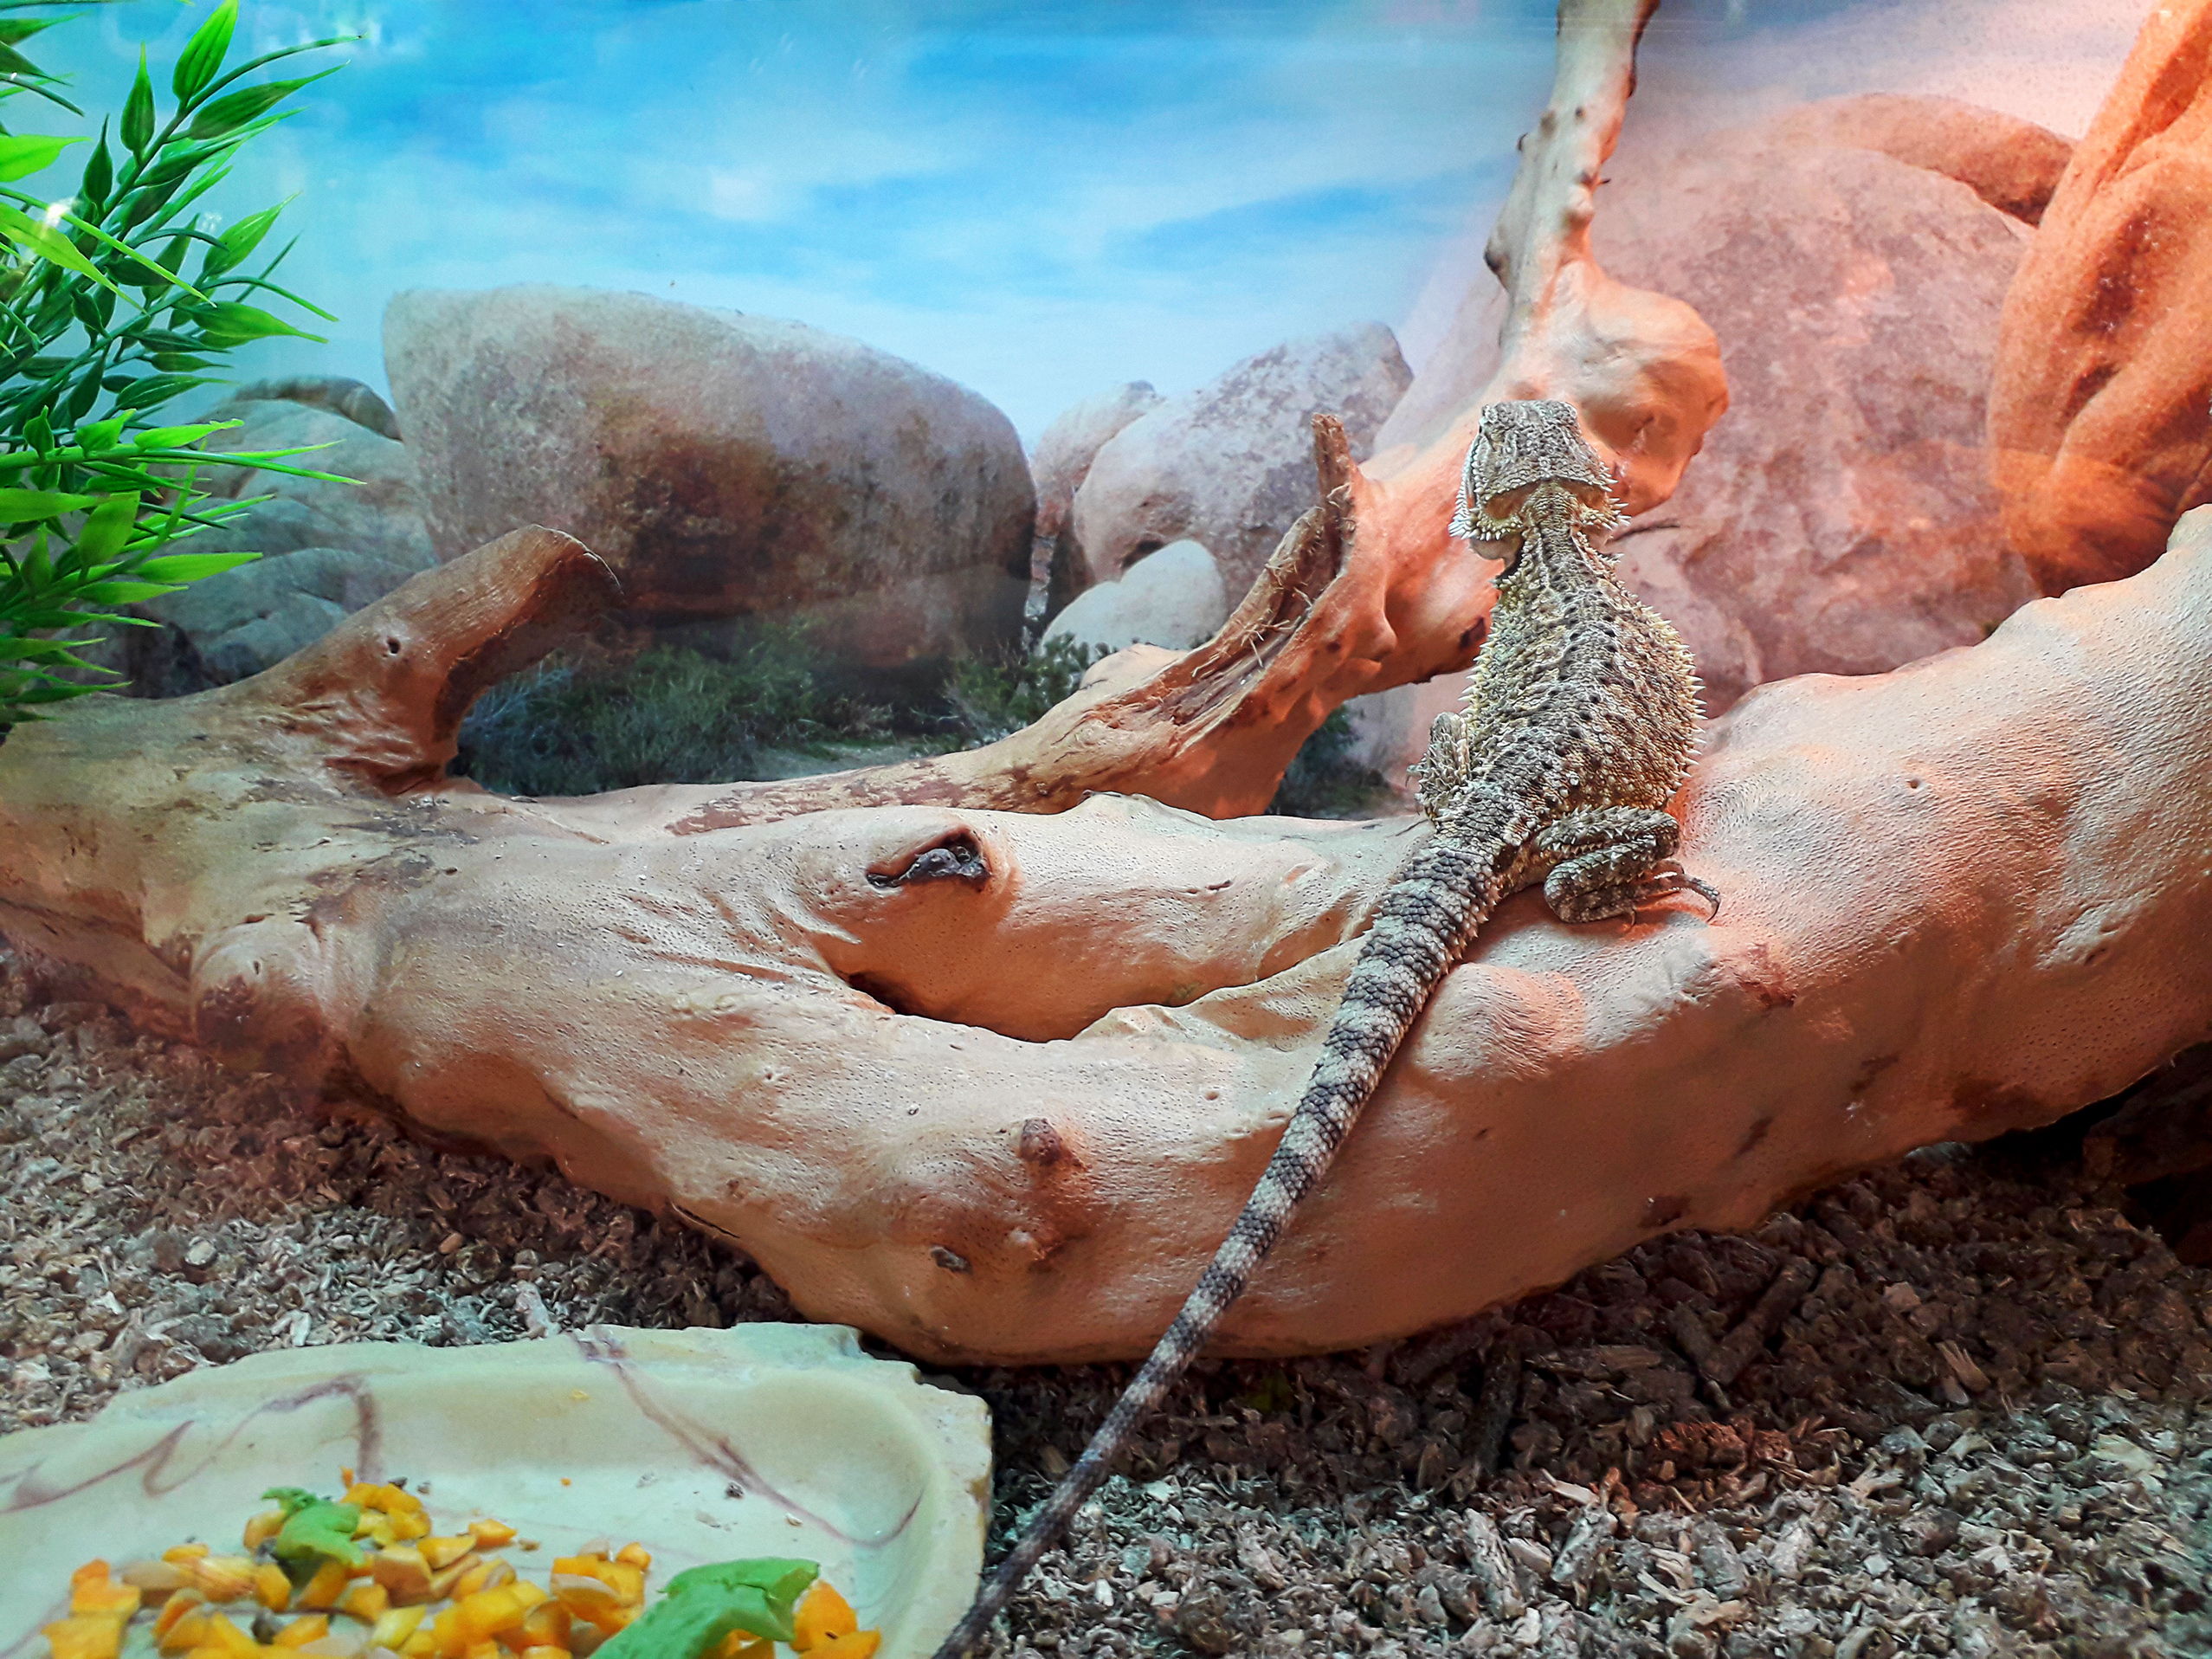 Bearded Dragons and Salmonella